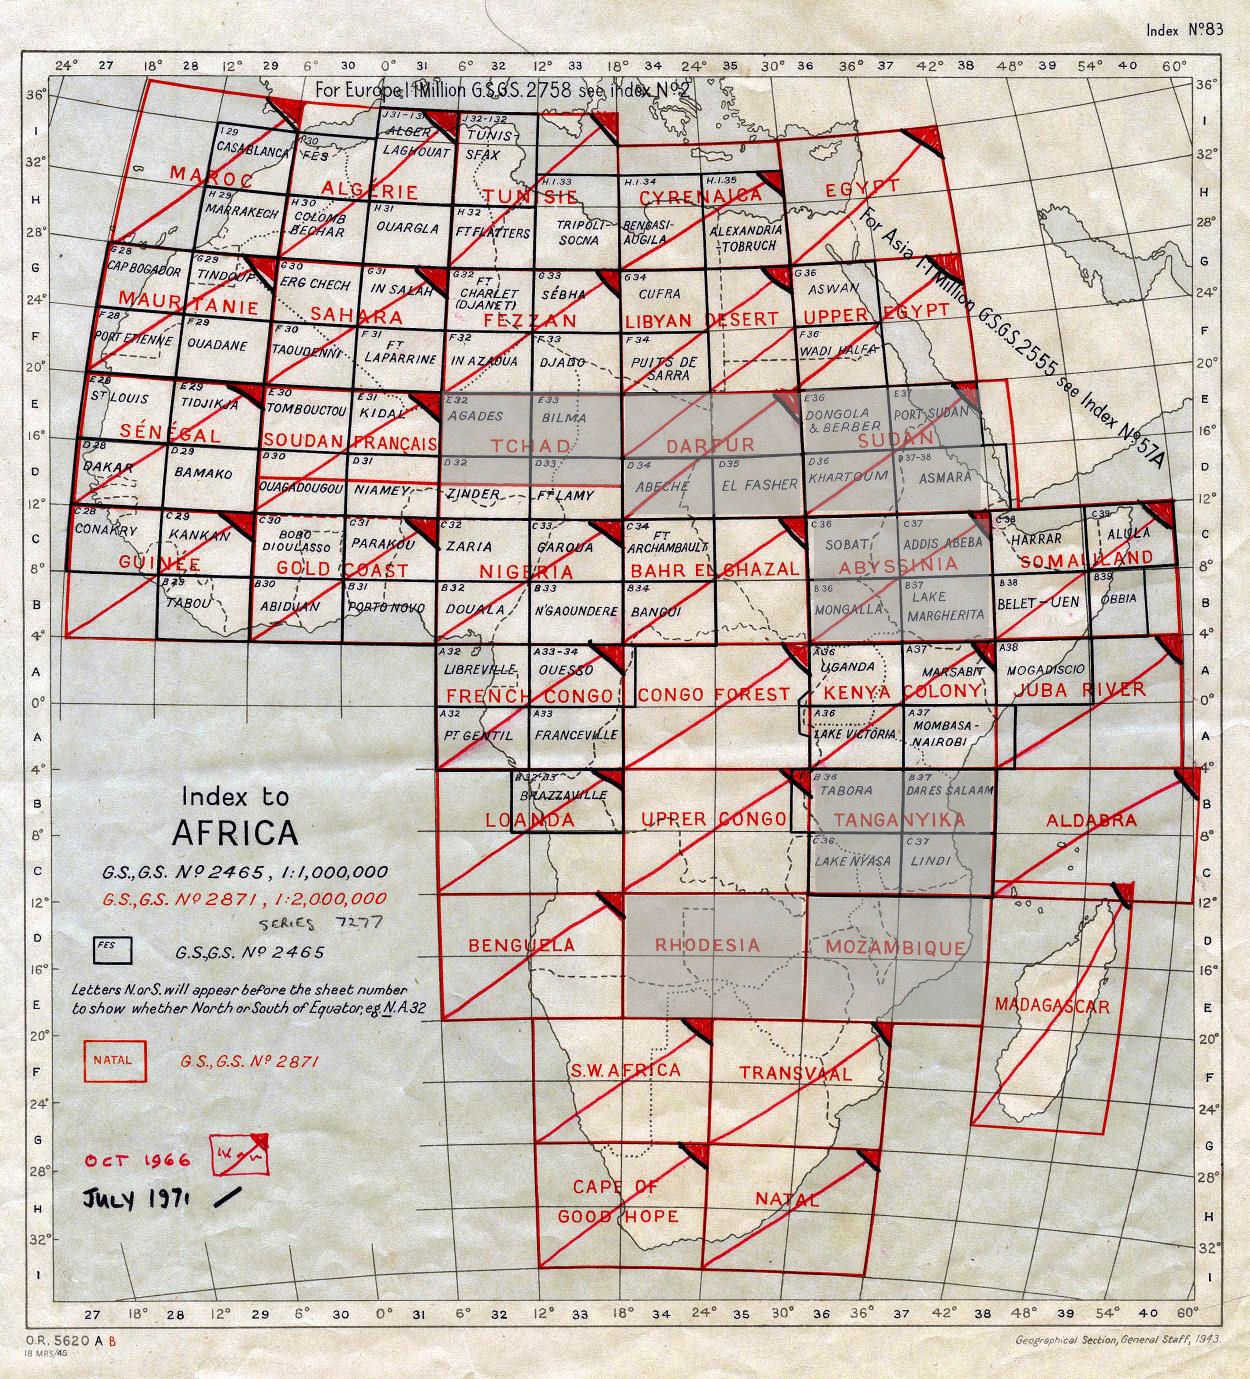 index to maps of Africa